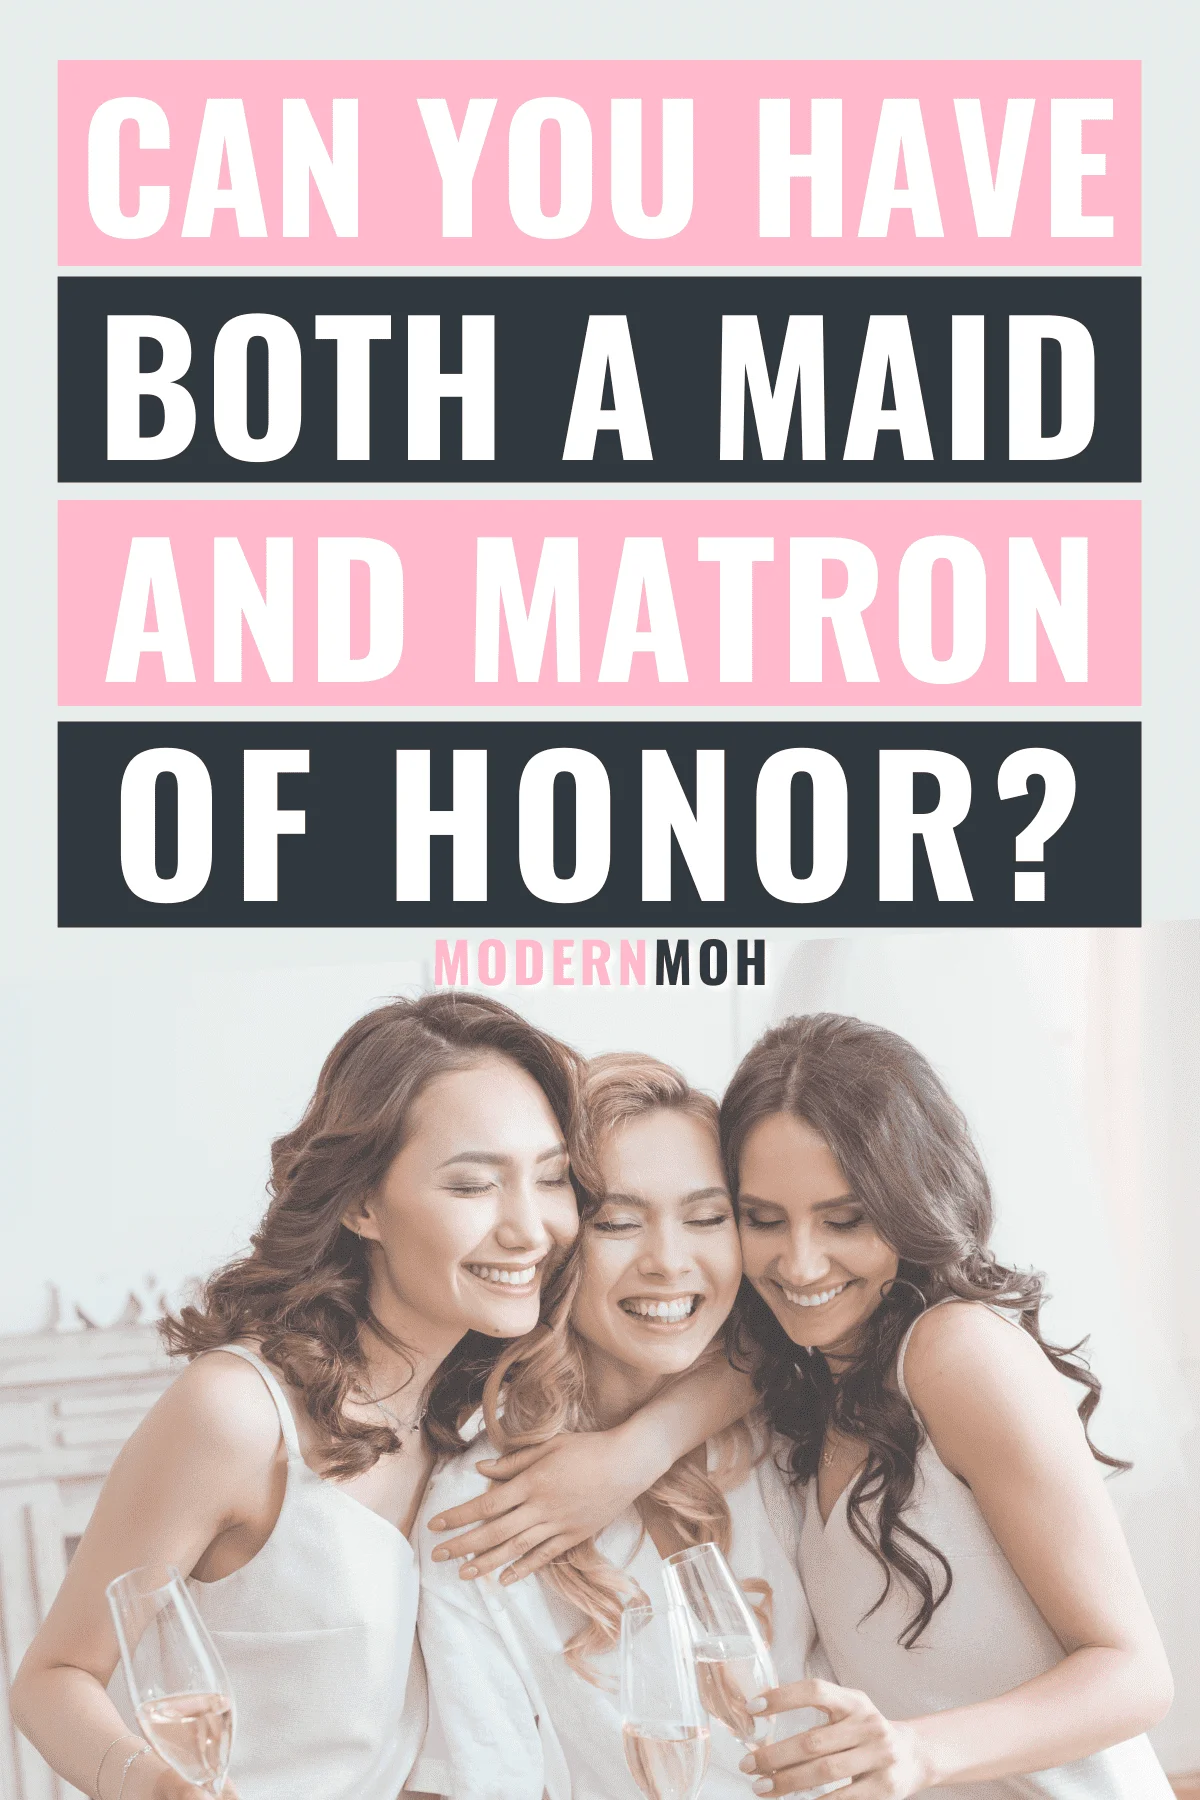 Maid of Honor vs Matron of Honor: Who Does What?